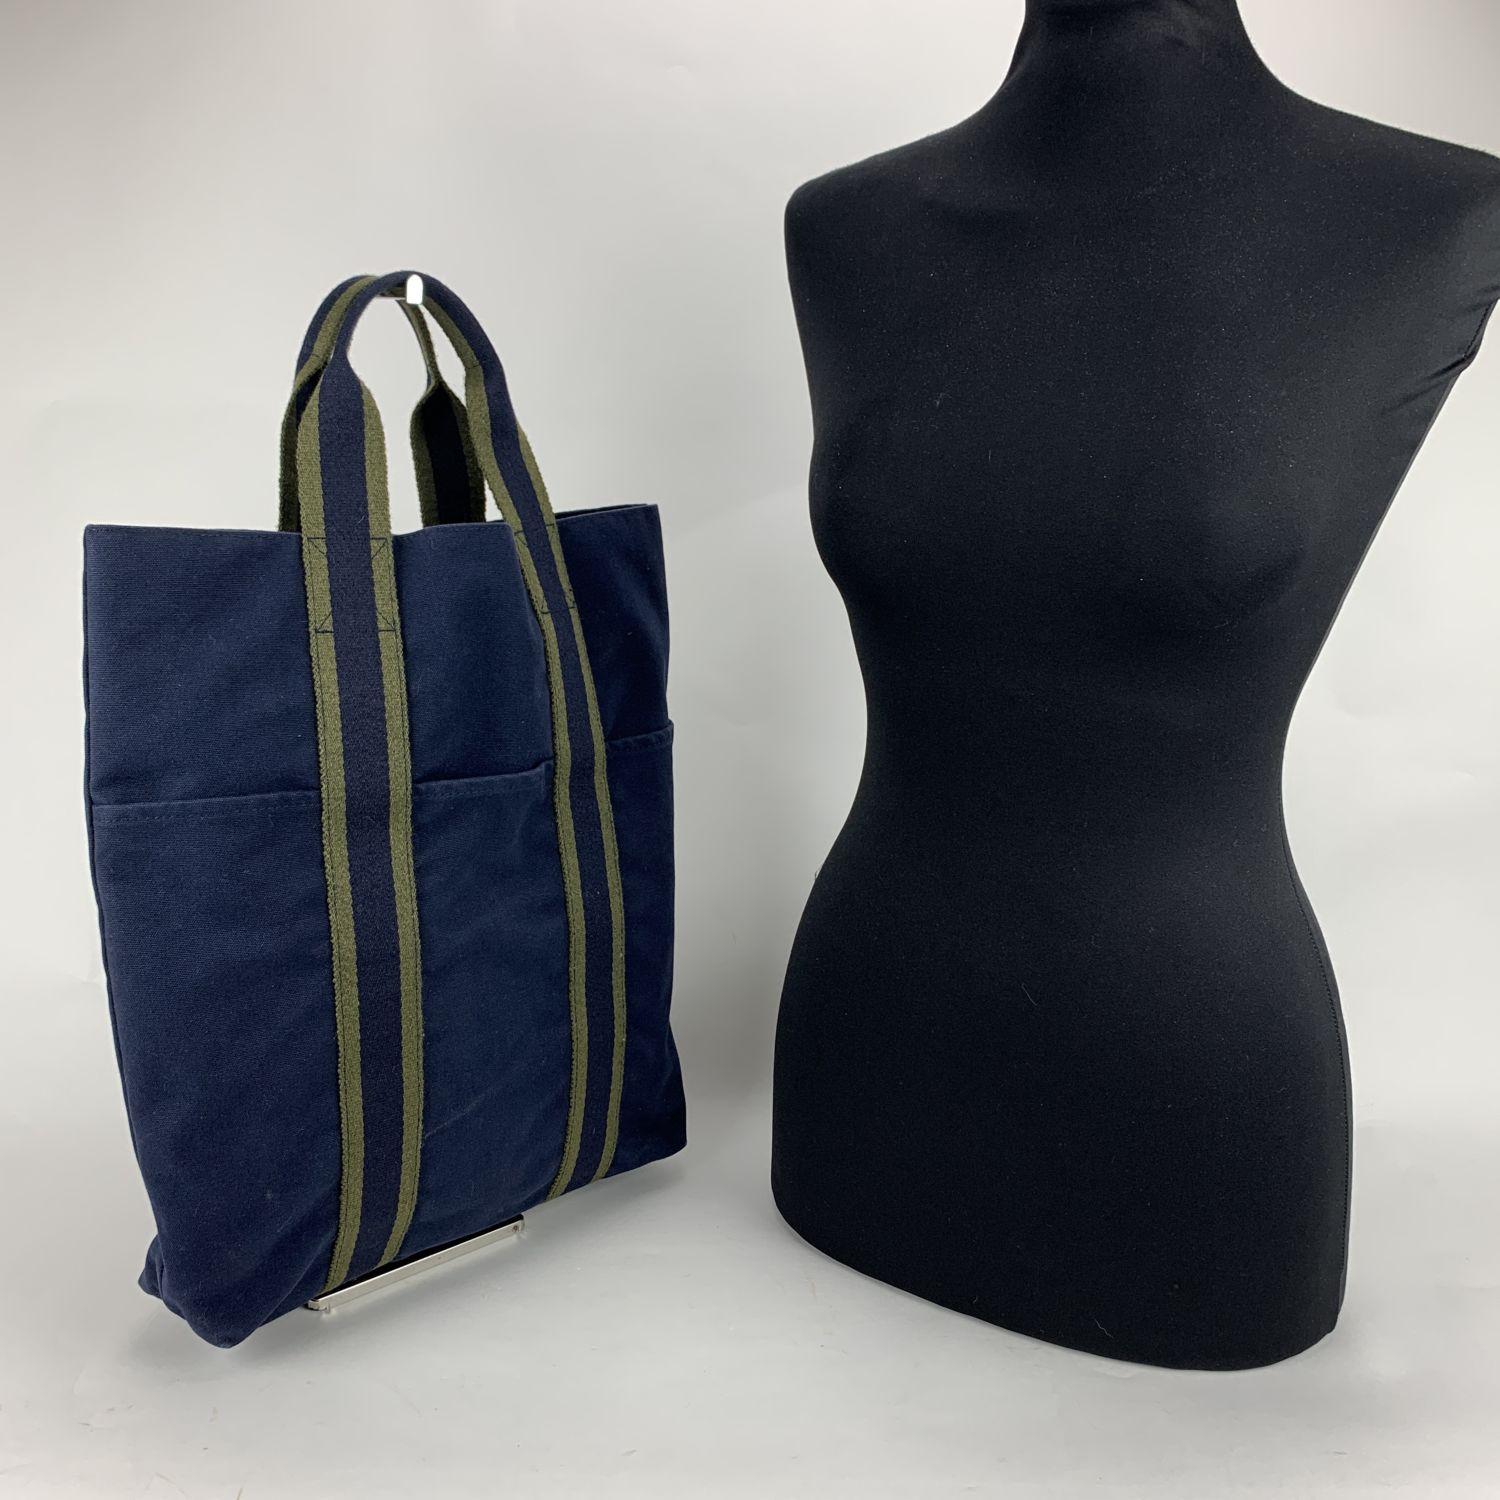 Model: 'HERMES Vertical FOURRE TOUT ' Shopping Bag. Made in France. Blue color with Green stripes. Material: 100% cotton. Durable canvas handles, perfect for casual and everyday use. Open top. 3 open pockets on the front. Canvas internal lining. 1